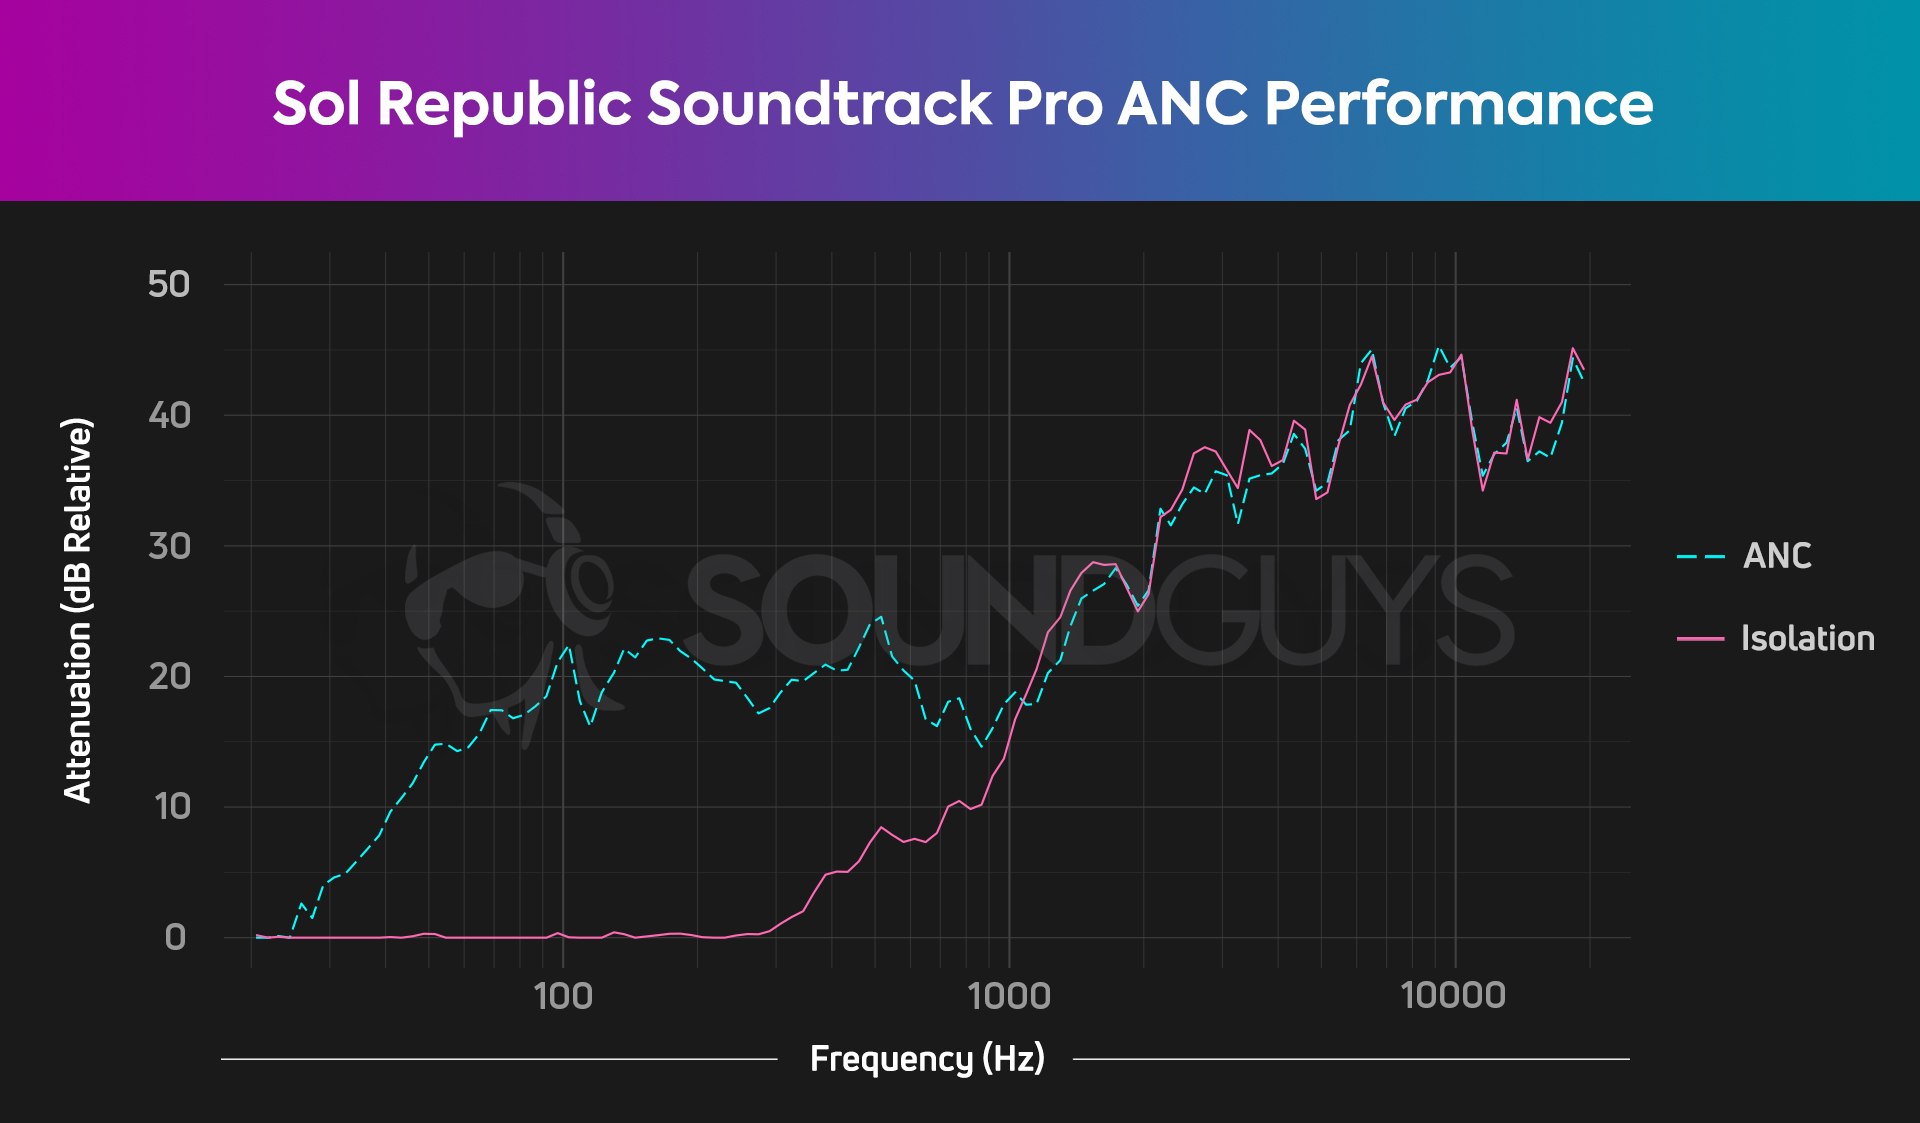 A chart showing the noise attenuation of the Sol Republic Soundtrack Pro, with significant attenuation from ANC in the low-mid frequencies.